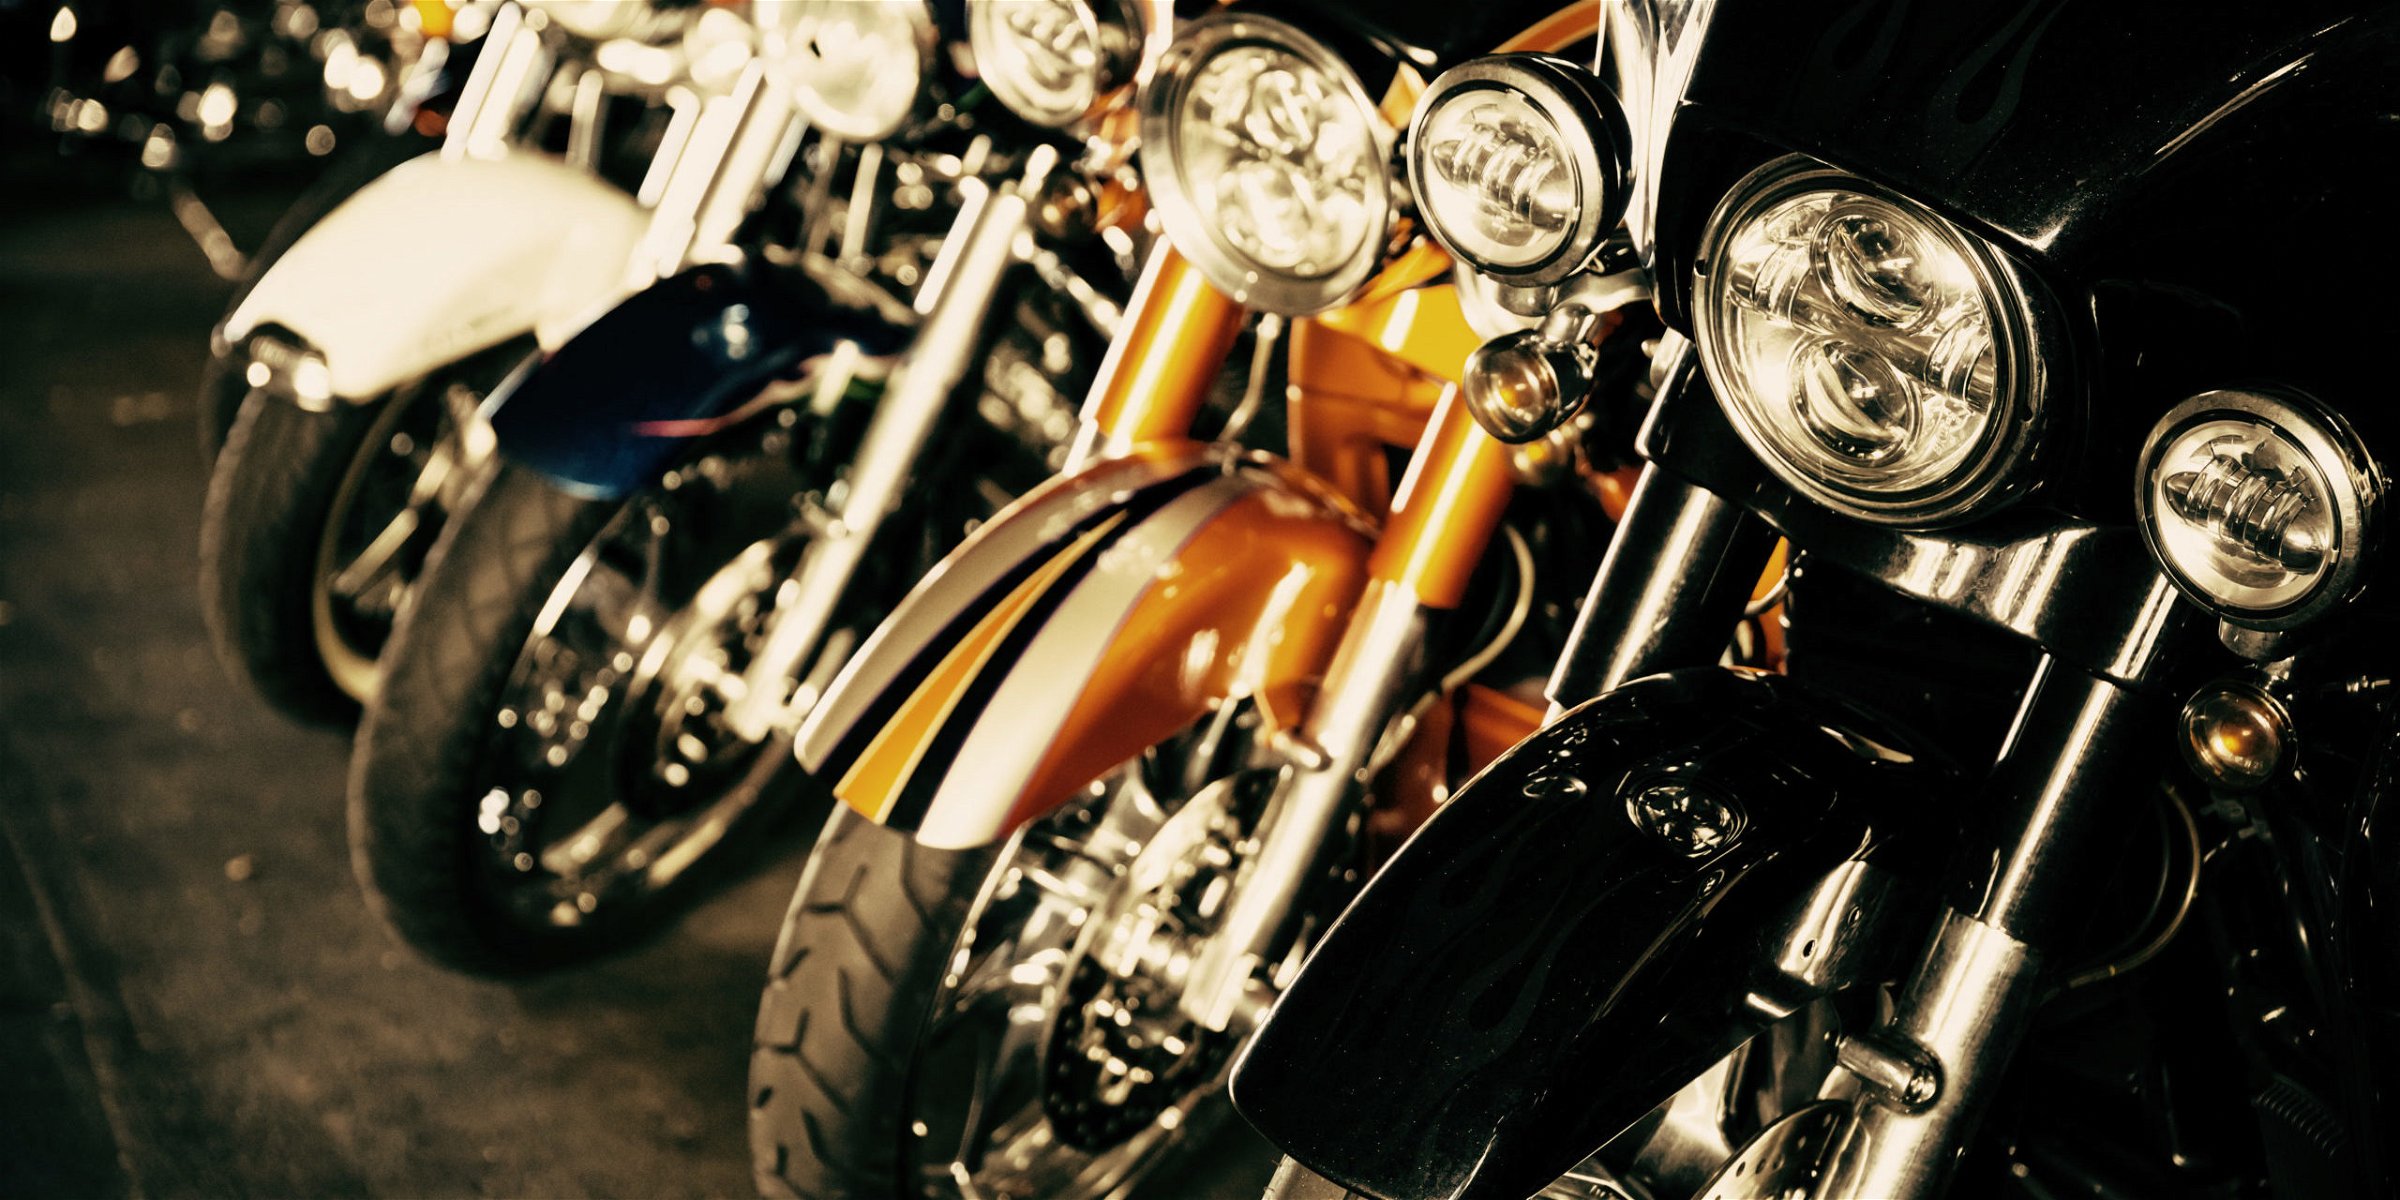 If you’re injured in a motorcycle accident during Myrtle Beach Bike Week, talk to an experienced South Carolina motorcycle accident lawyer immediately.